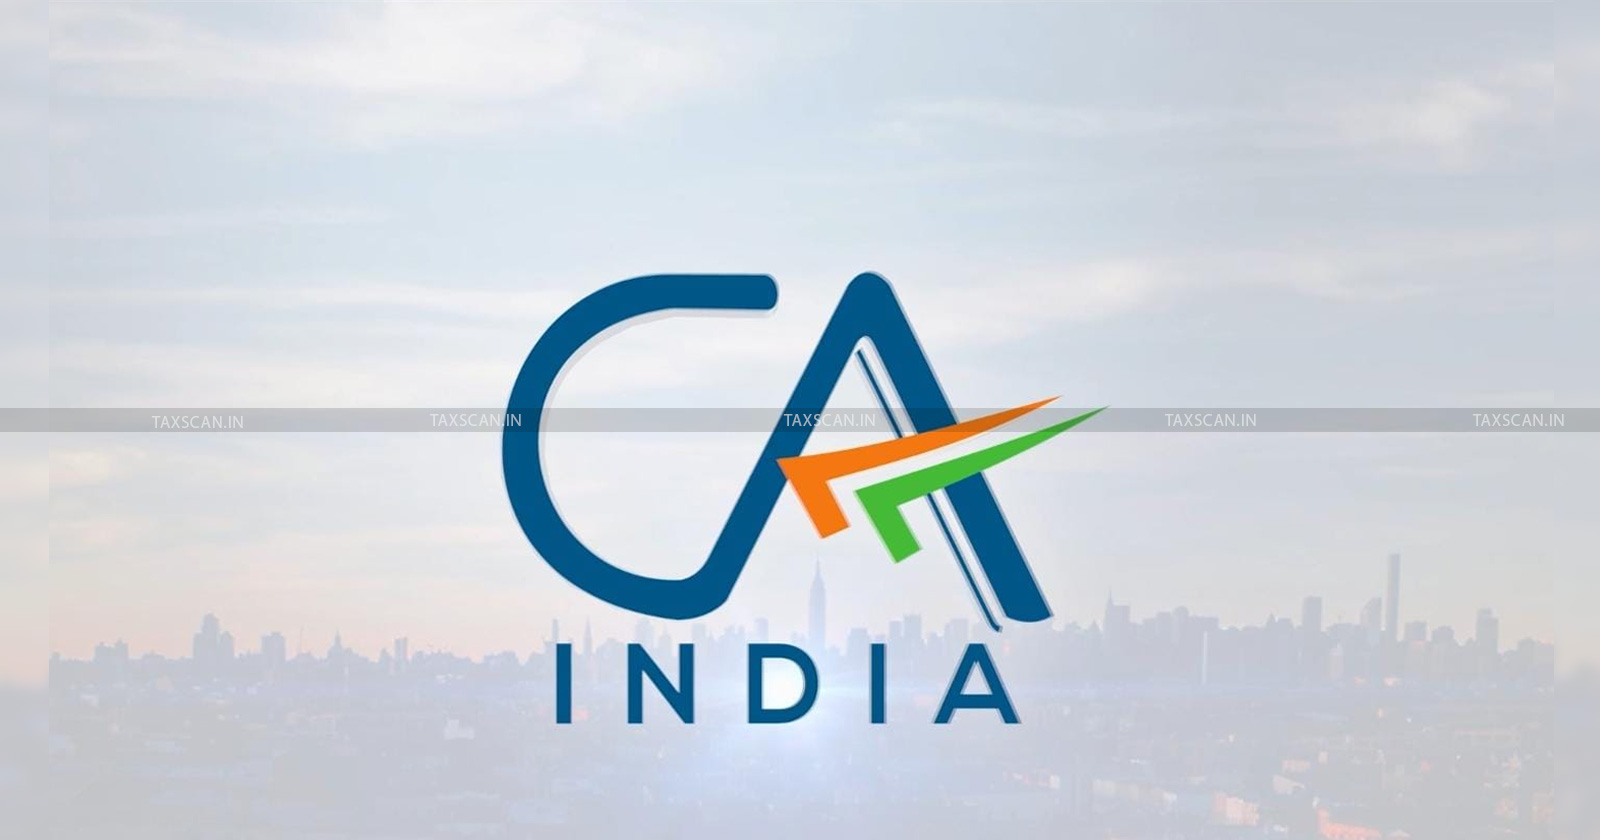 New ICAI CA Logo - ICAI CA Logo - ICAI - CA - CA Logo - Know the Guidelines of Usage - taxscan